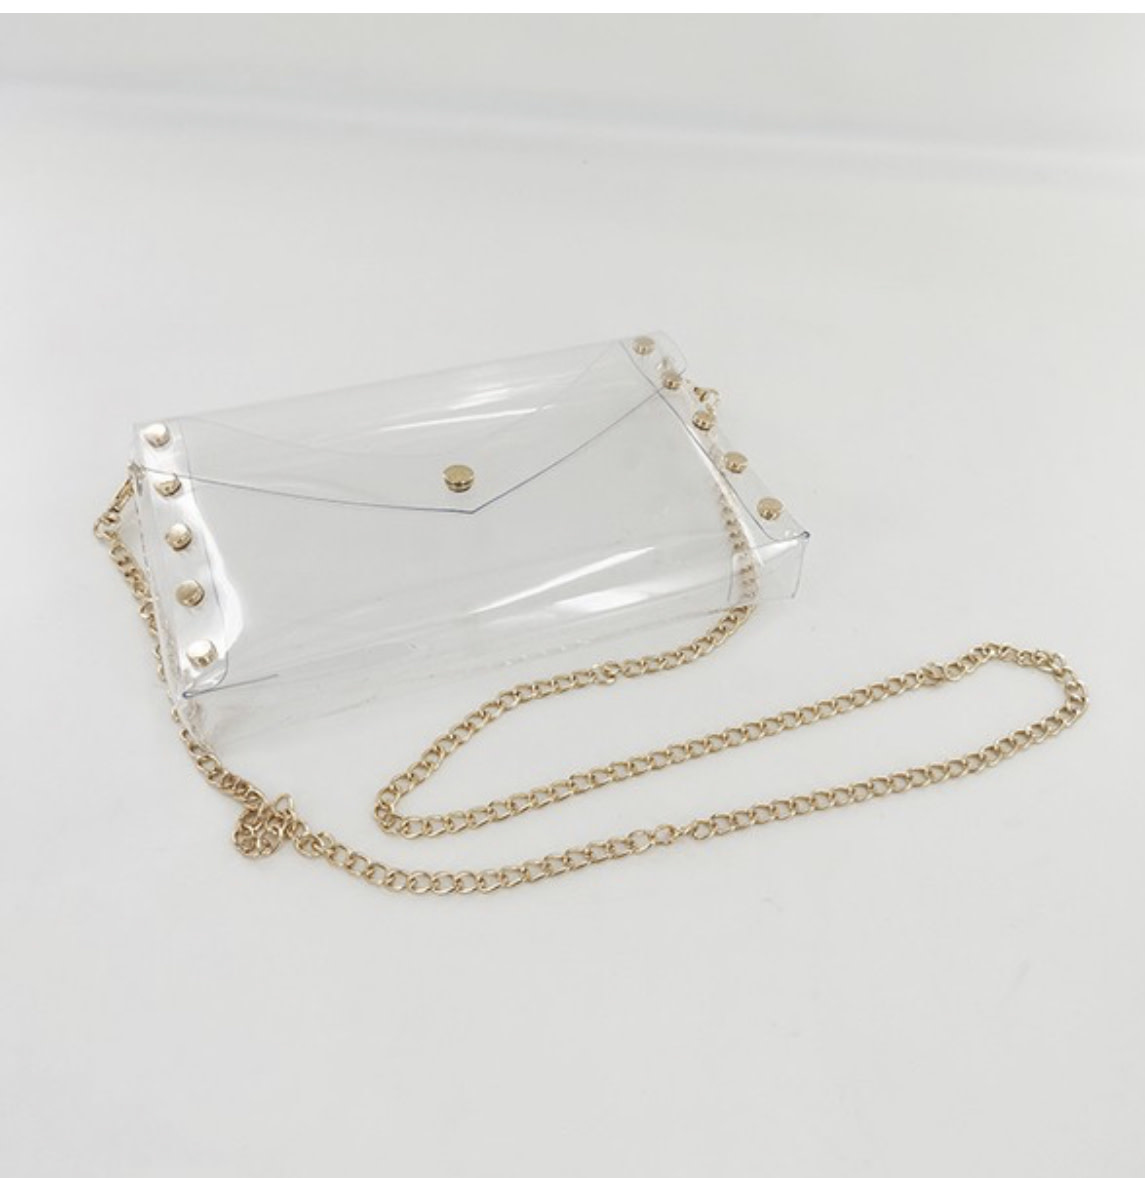 The Athens 001 Clear Small Studded Bag